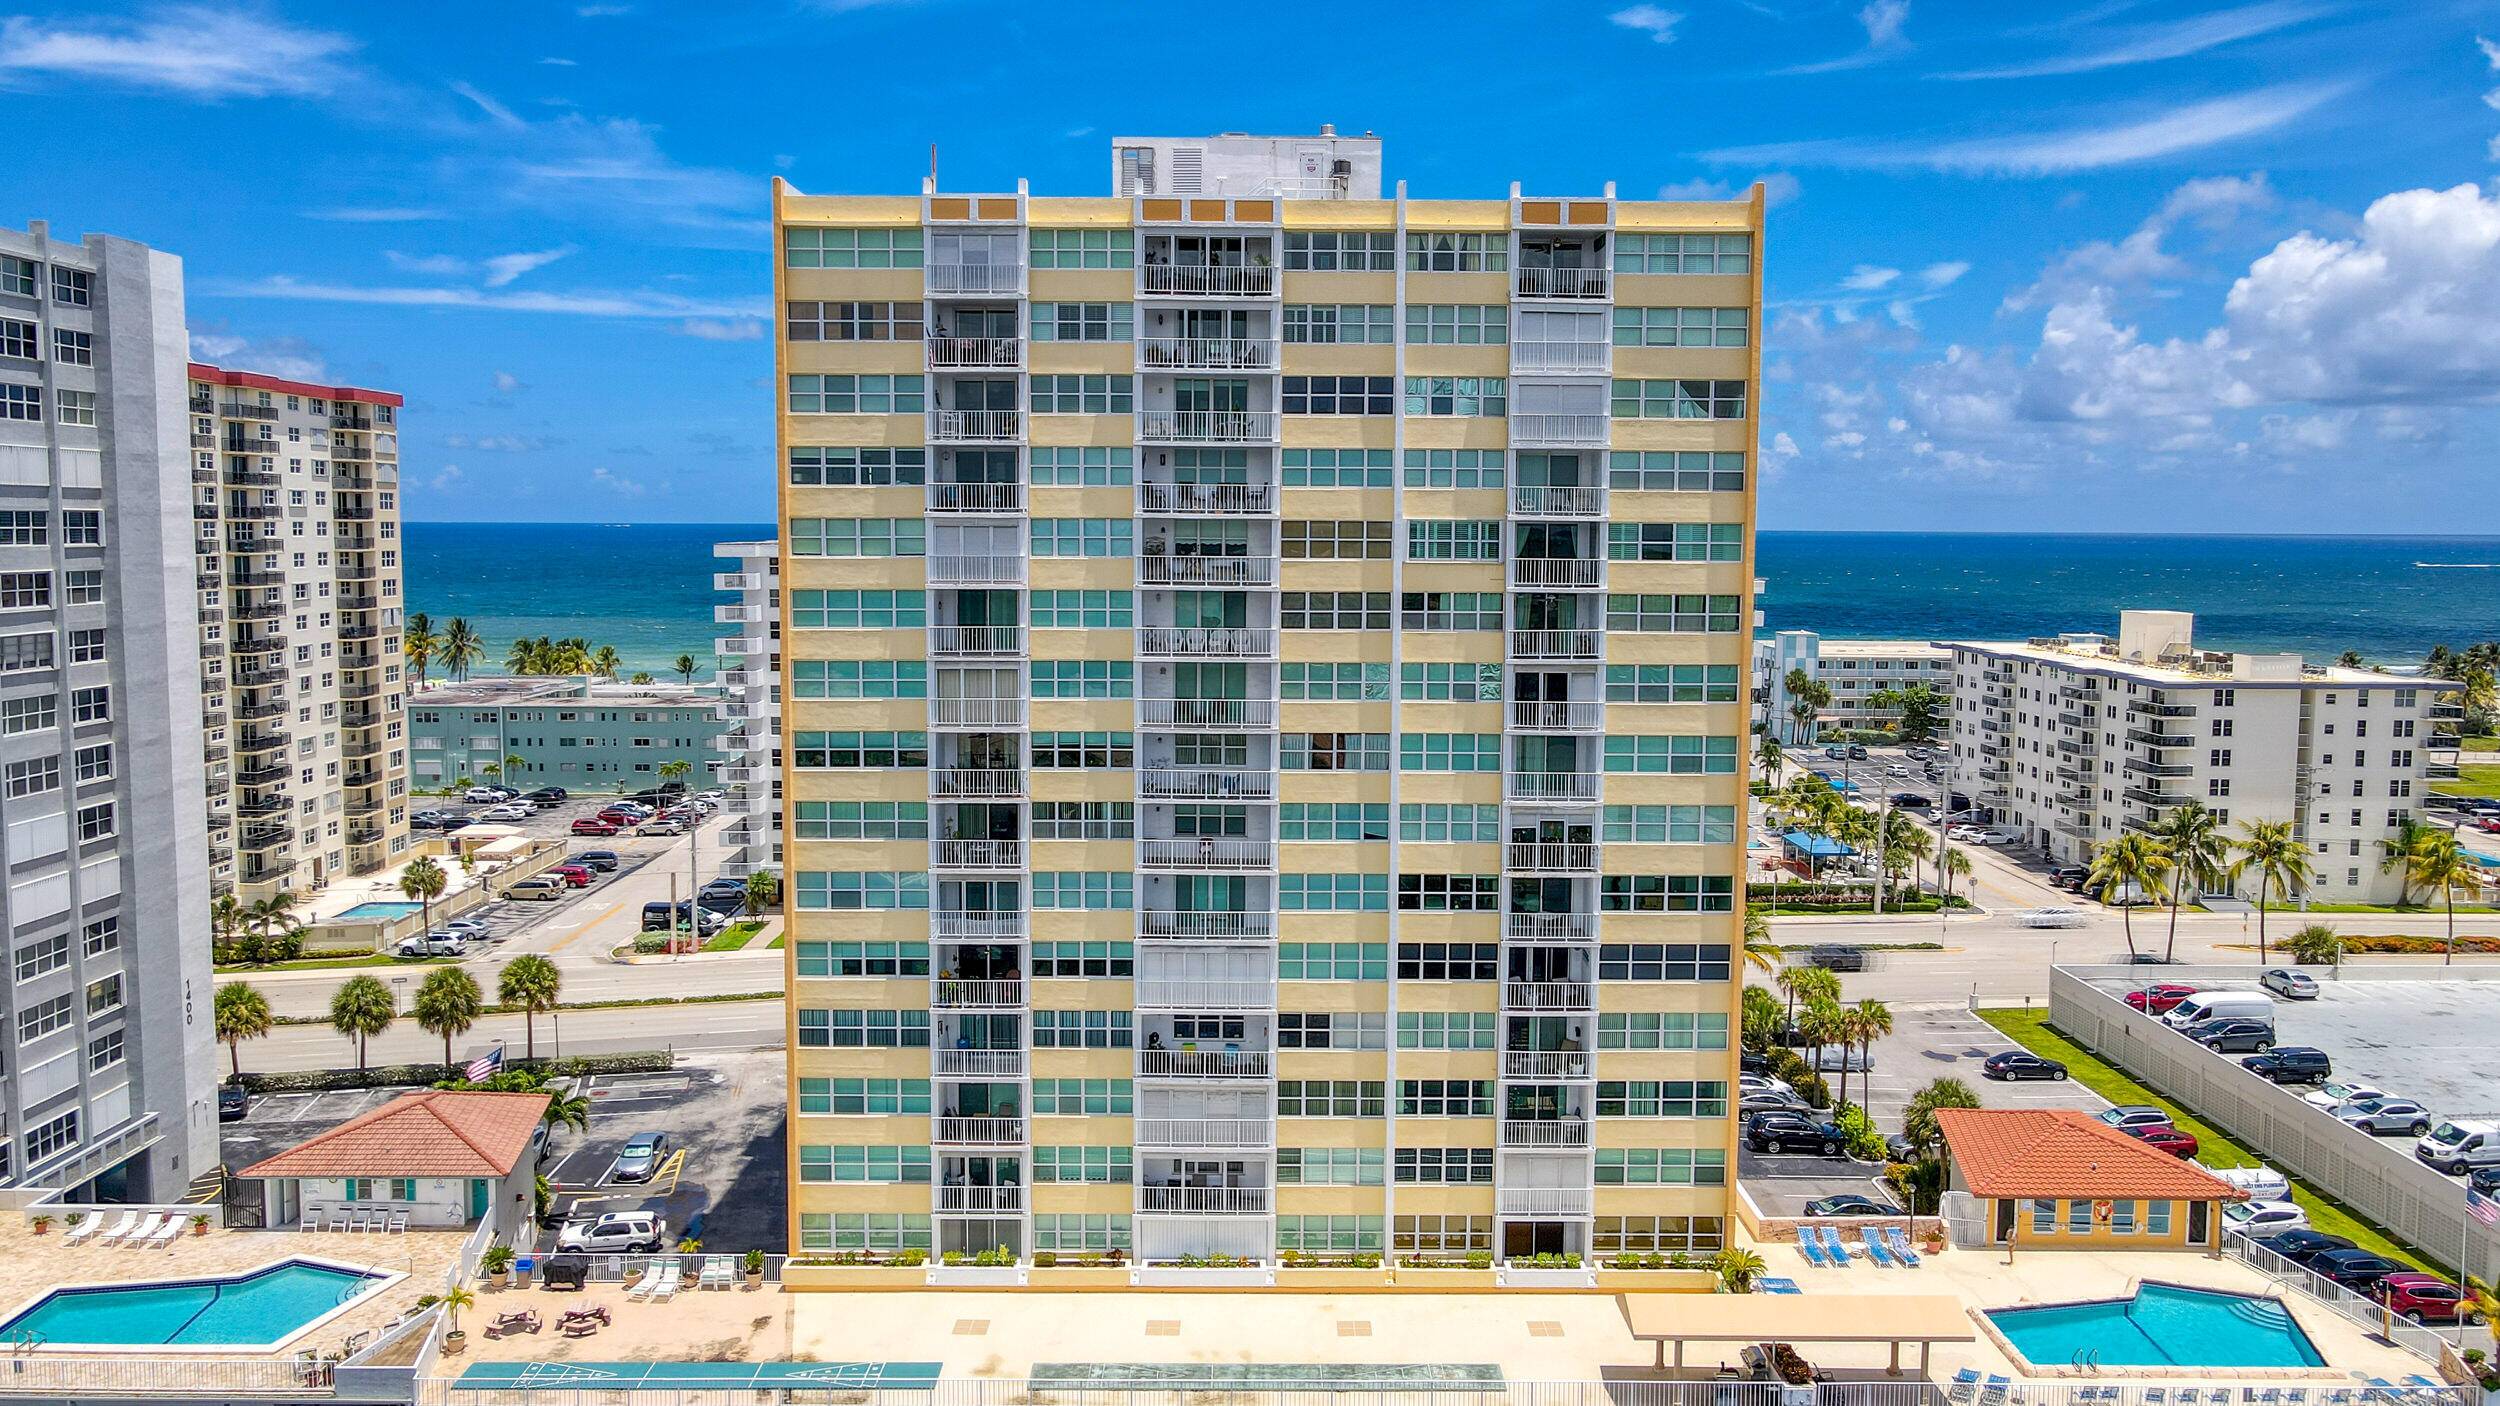 Spacious 2 Bedroom 2 Bathroom corner unit with direct Intracoastal views from living room, dining room, balcony and master bedroom.